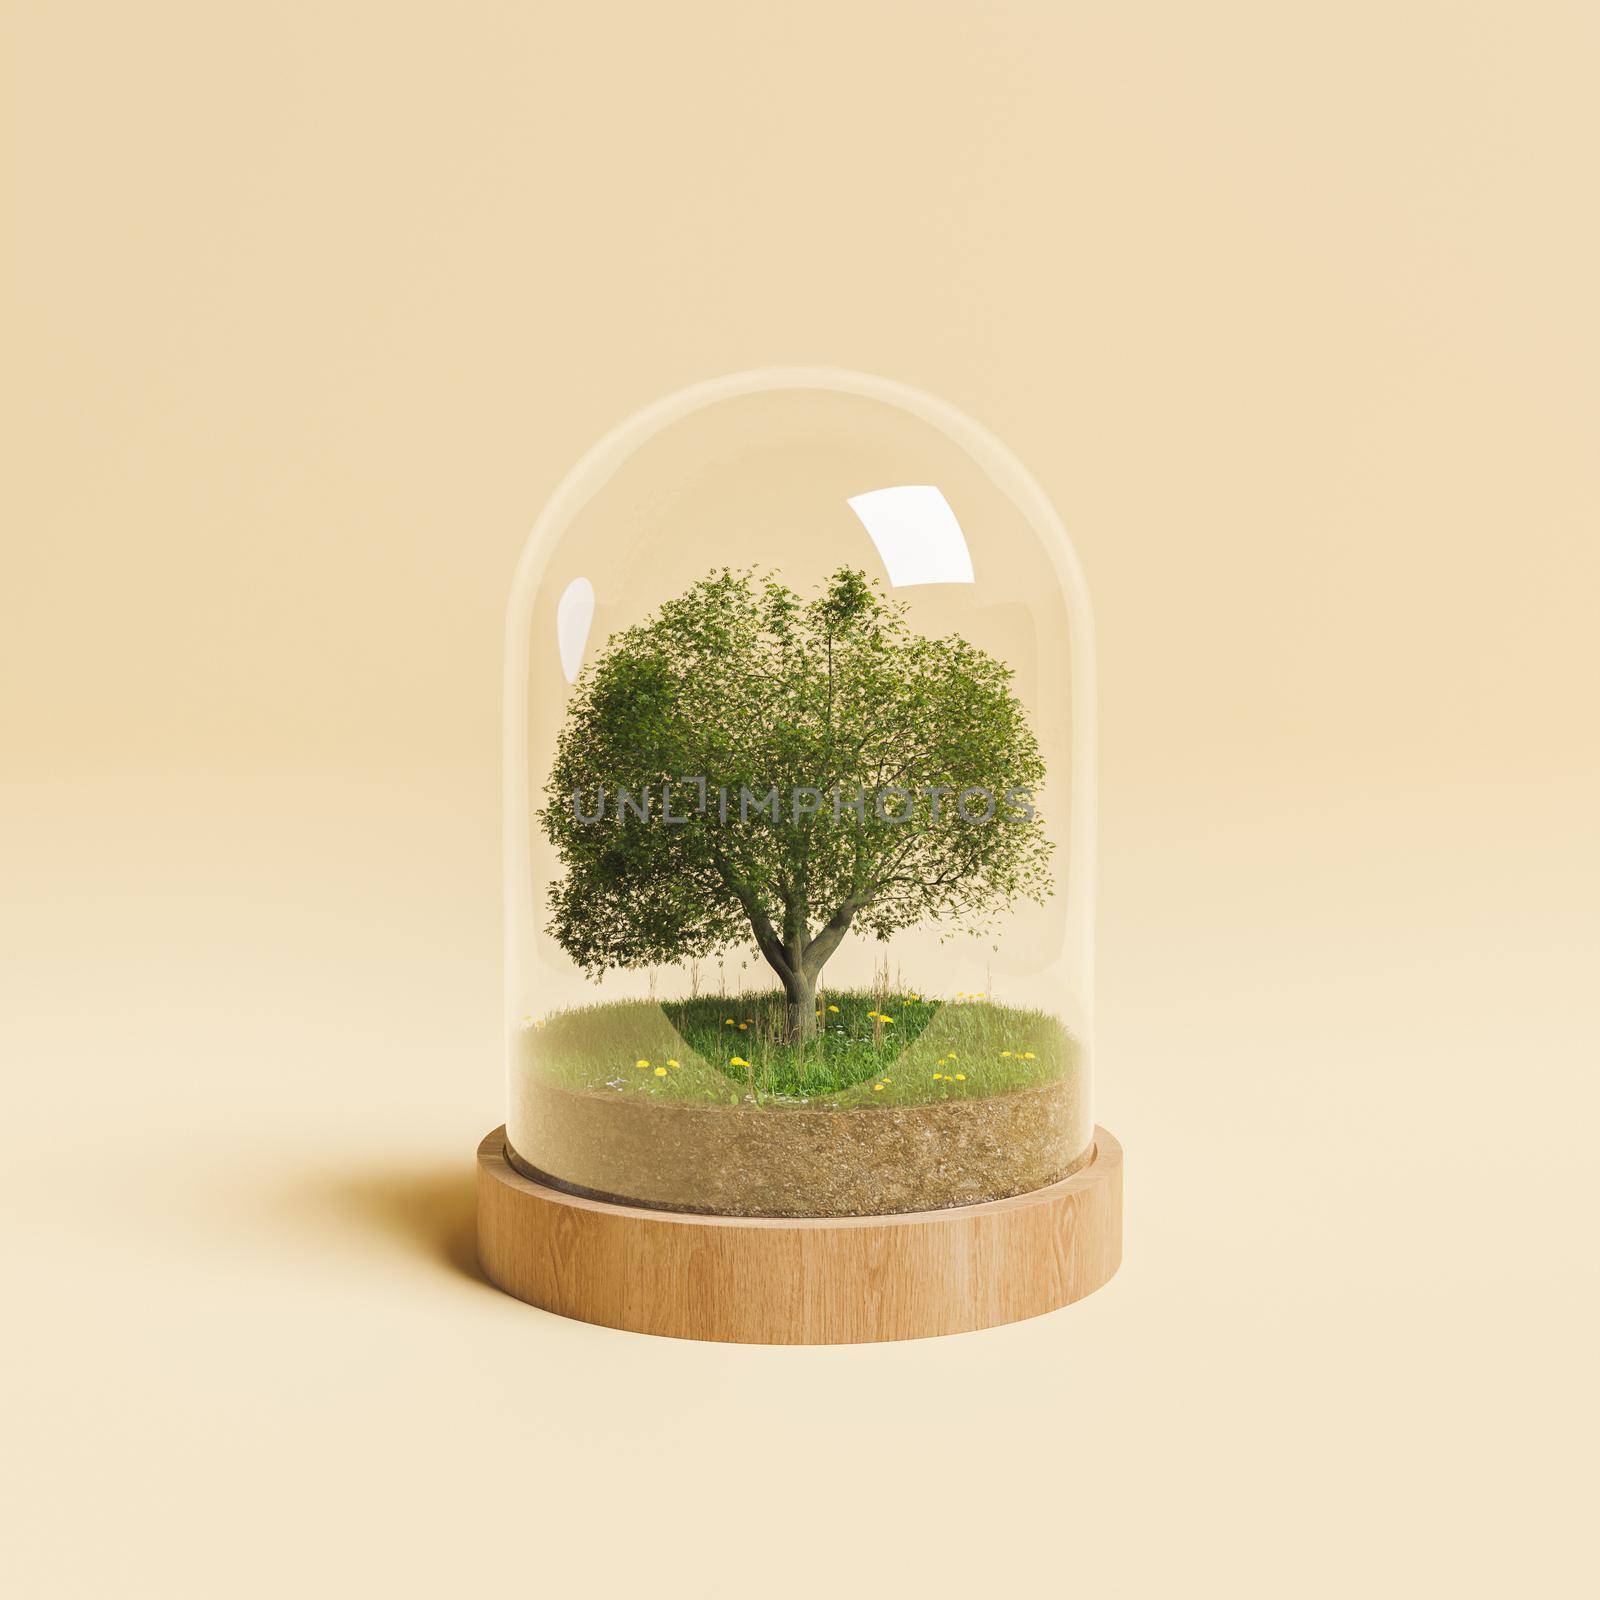 tree with small meadow inside a glass dome on beige background. concept of climate change, environment and nature. 3d render